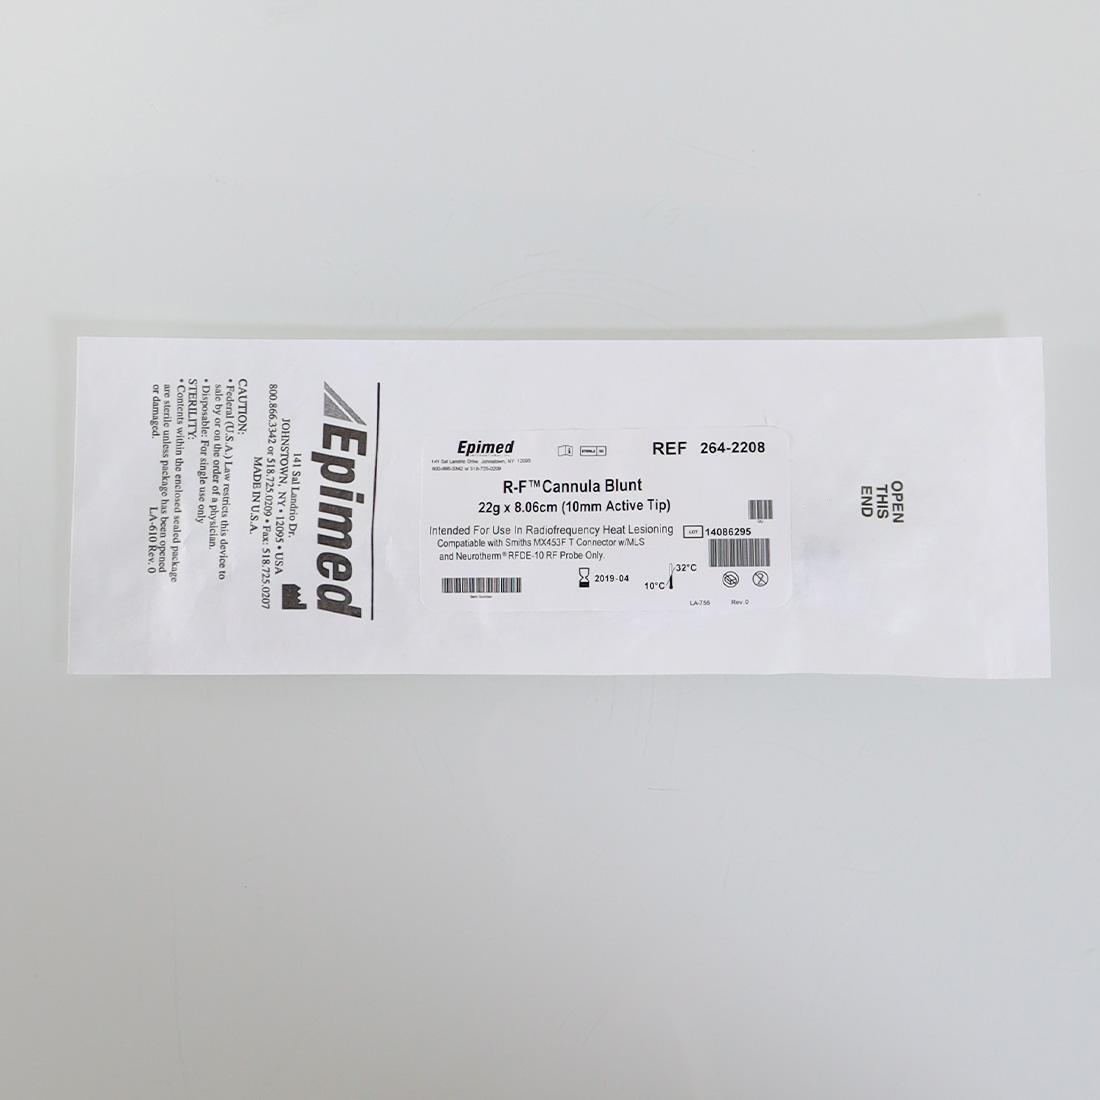 Thermi Aesthetics ThermiRF 264-2208 Radiofrequency Cannula Straight Blunt 22G